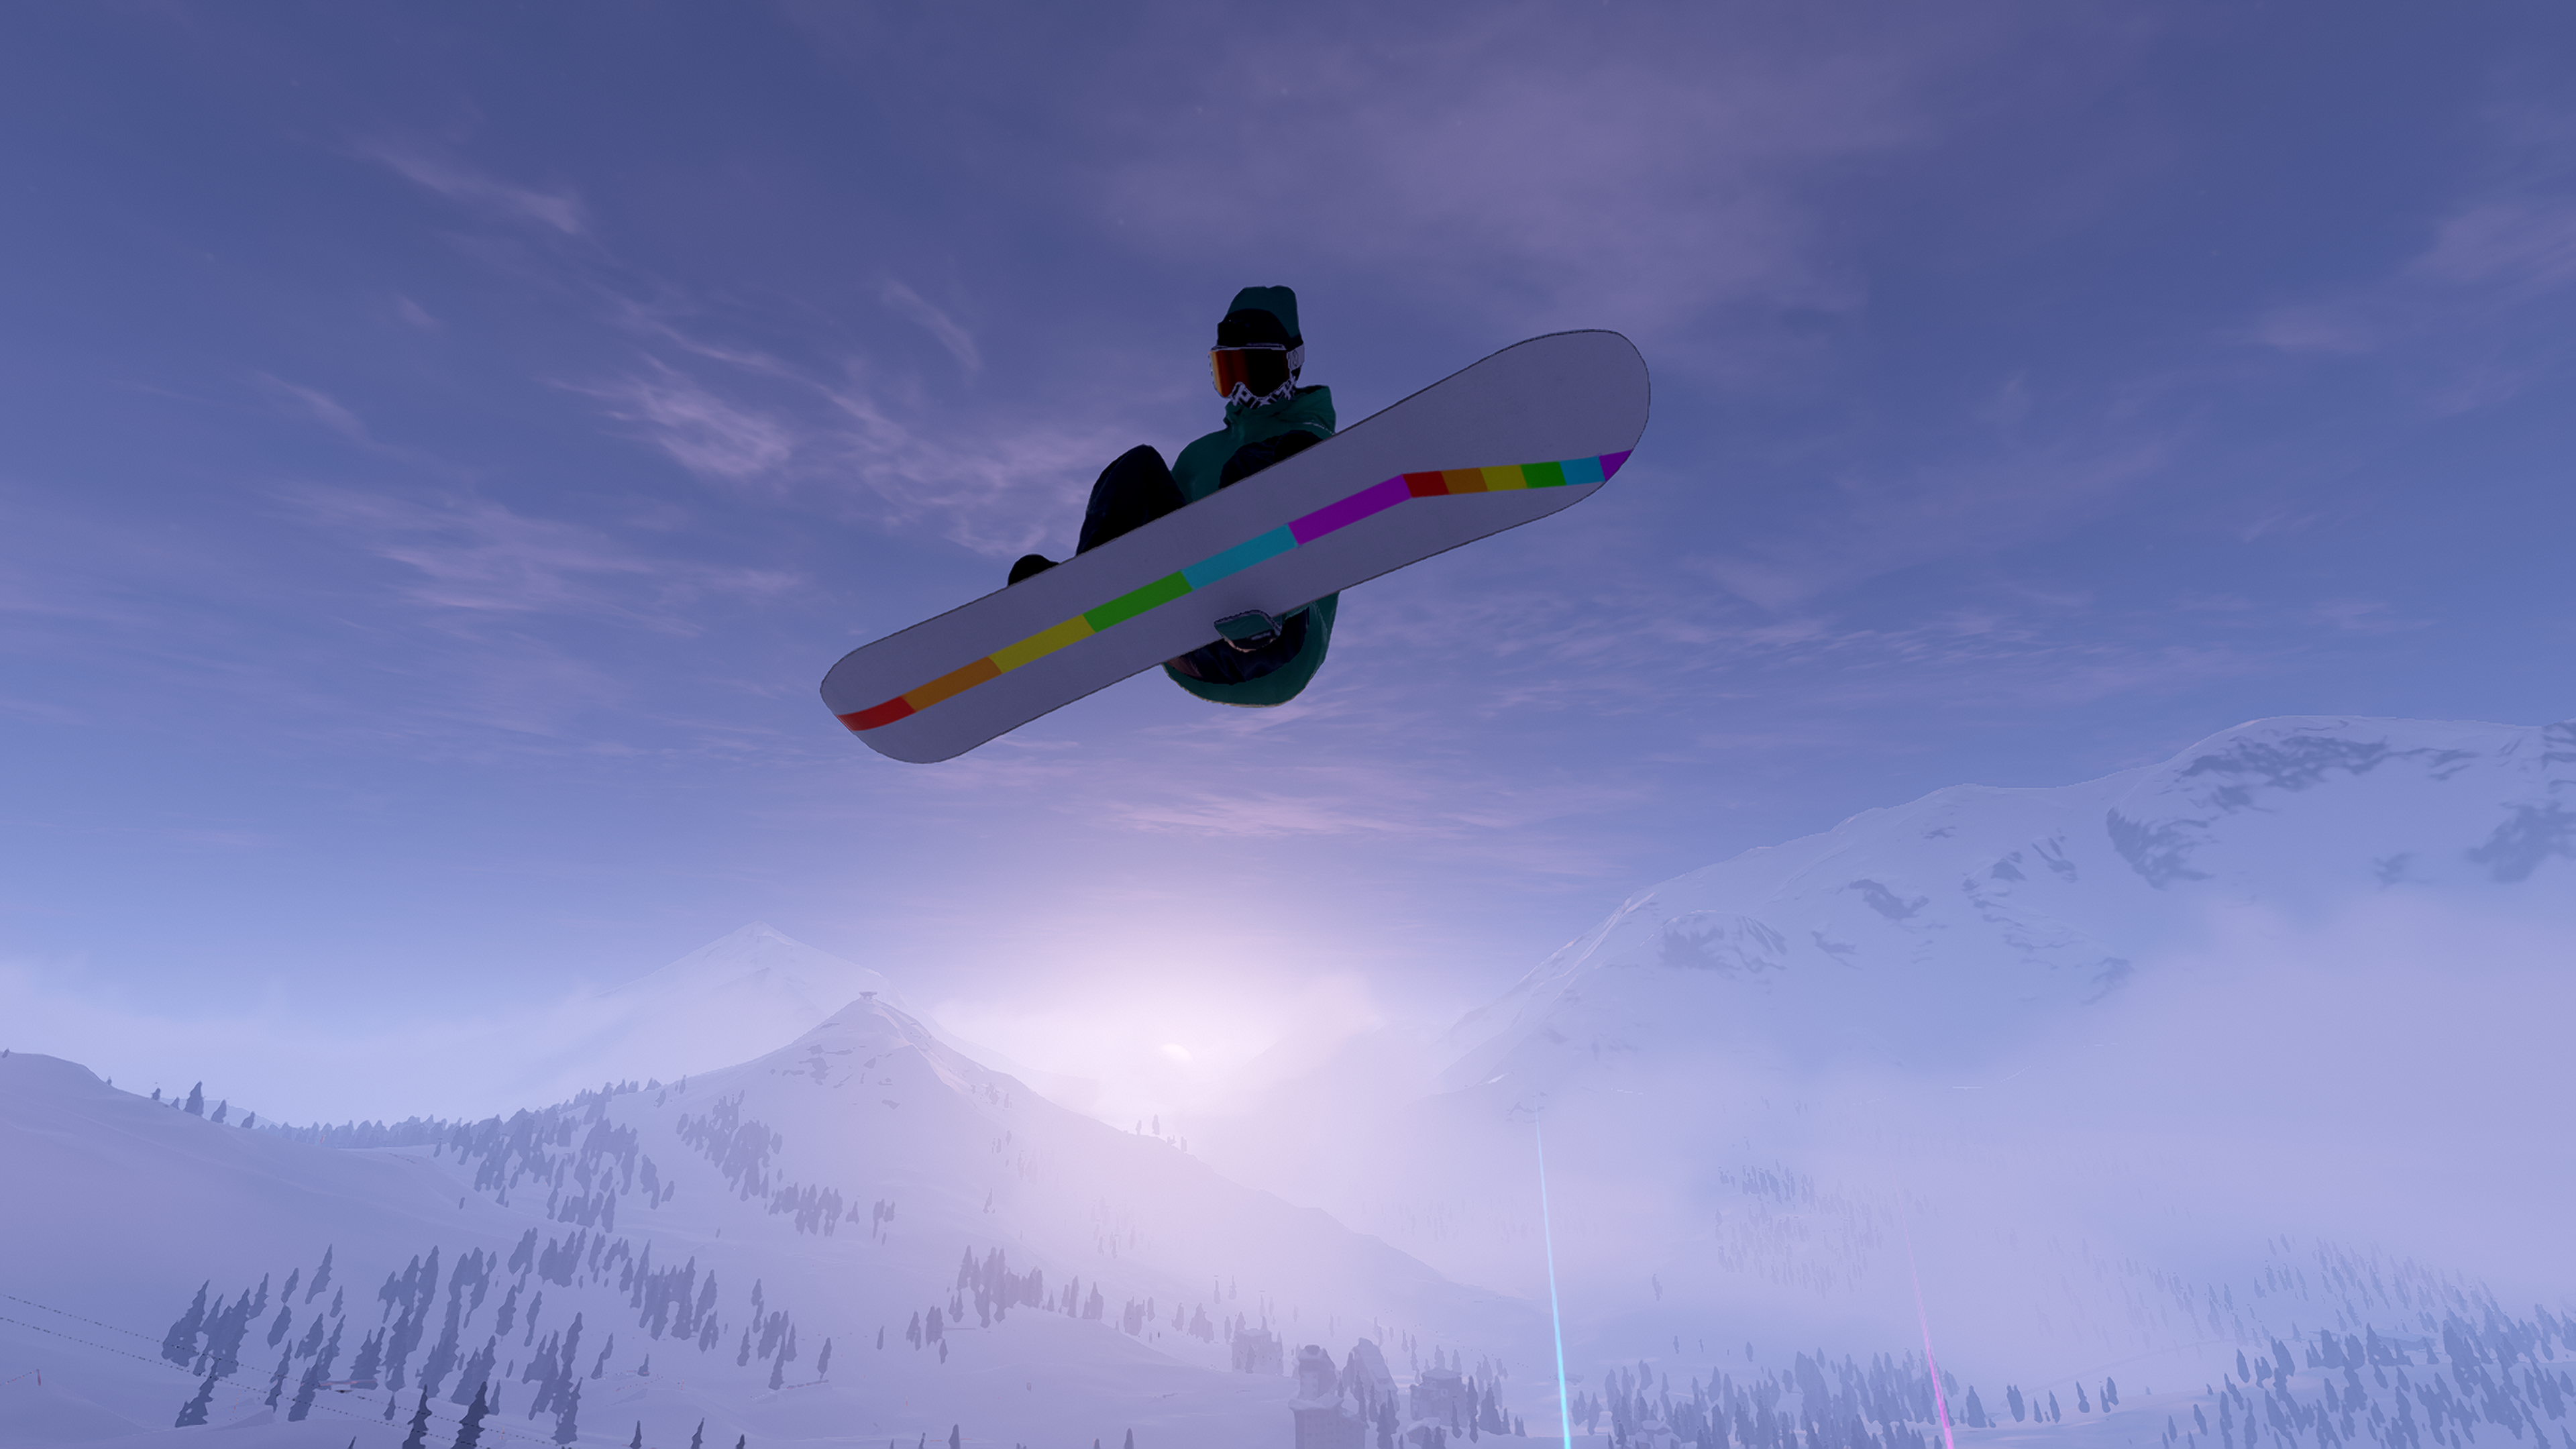 A snowboarder dressed in green jacket, green hat and black trousers jumps over the camera view on a white board featuring a rainbow coloured stripe on the underside. Sun blazes through snowy, tree covered mountains in the background with a blue sky above